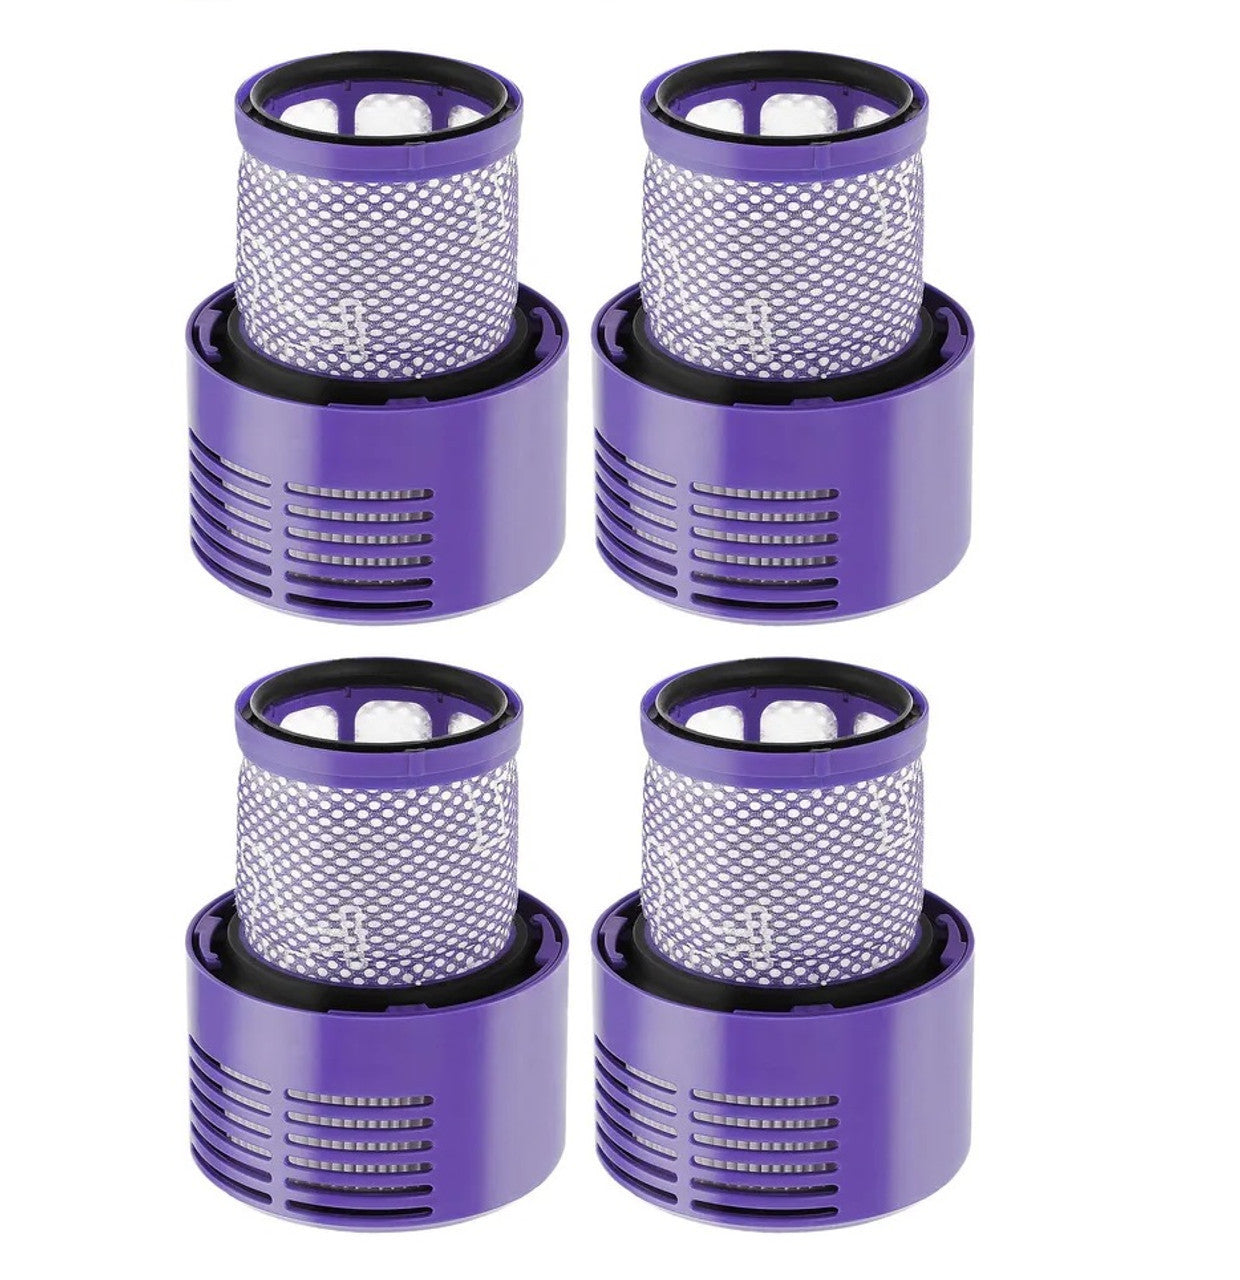 4 x HEPA Filters for Cyclone V10 Vacuum Cleaners